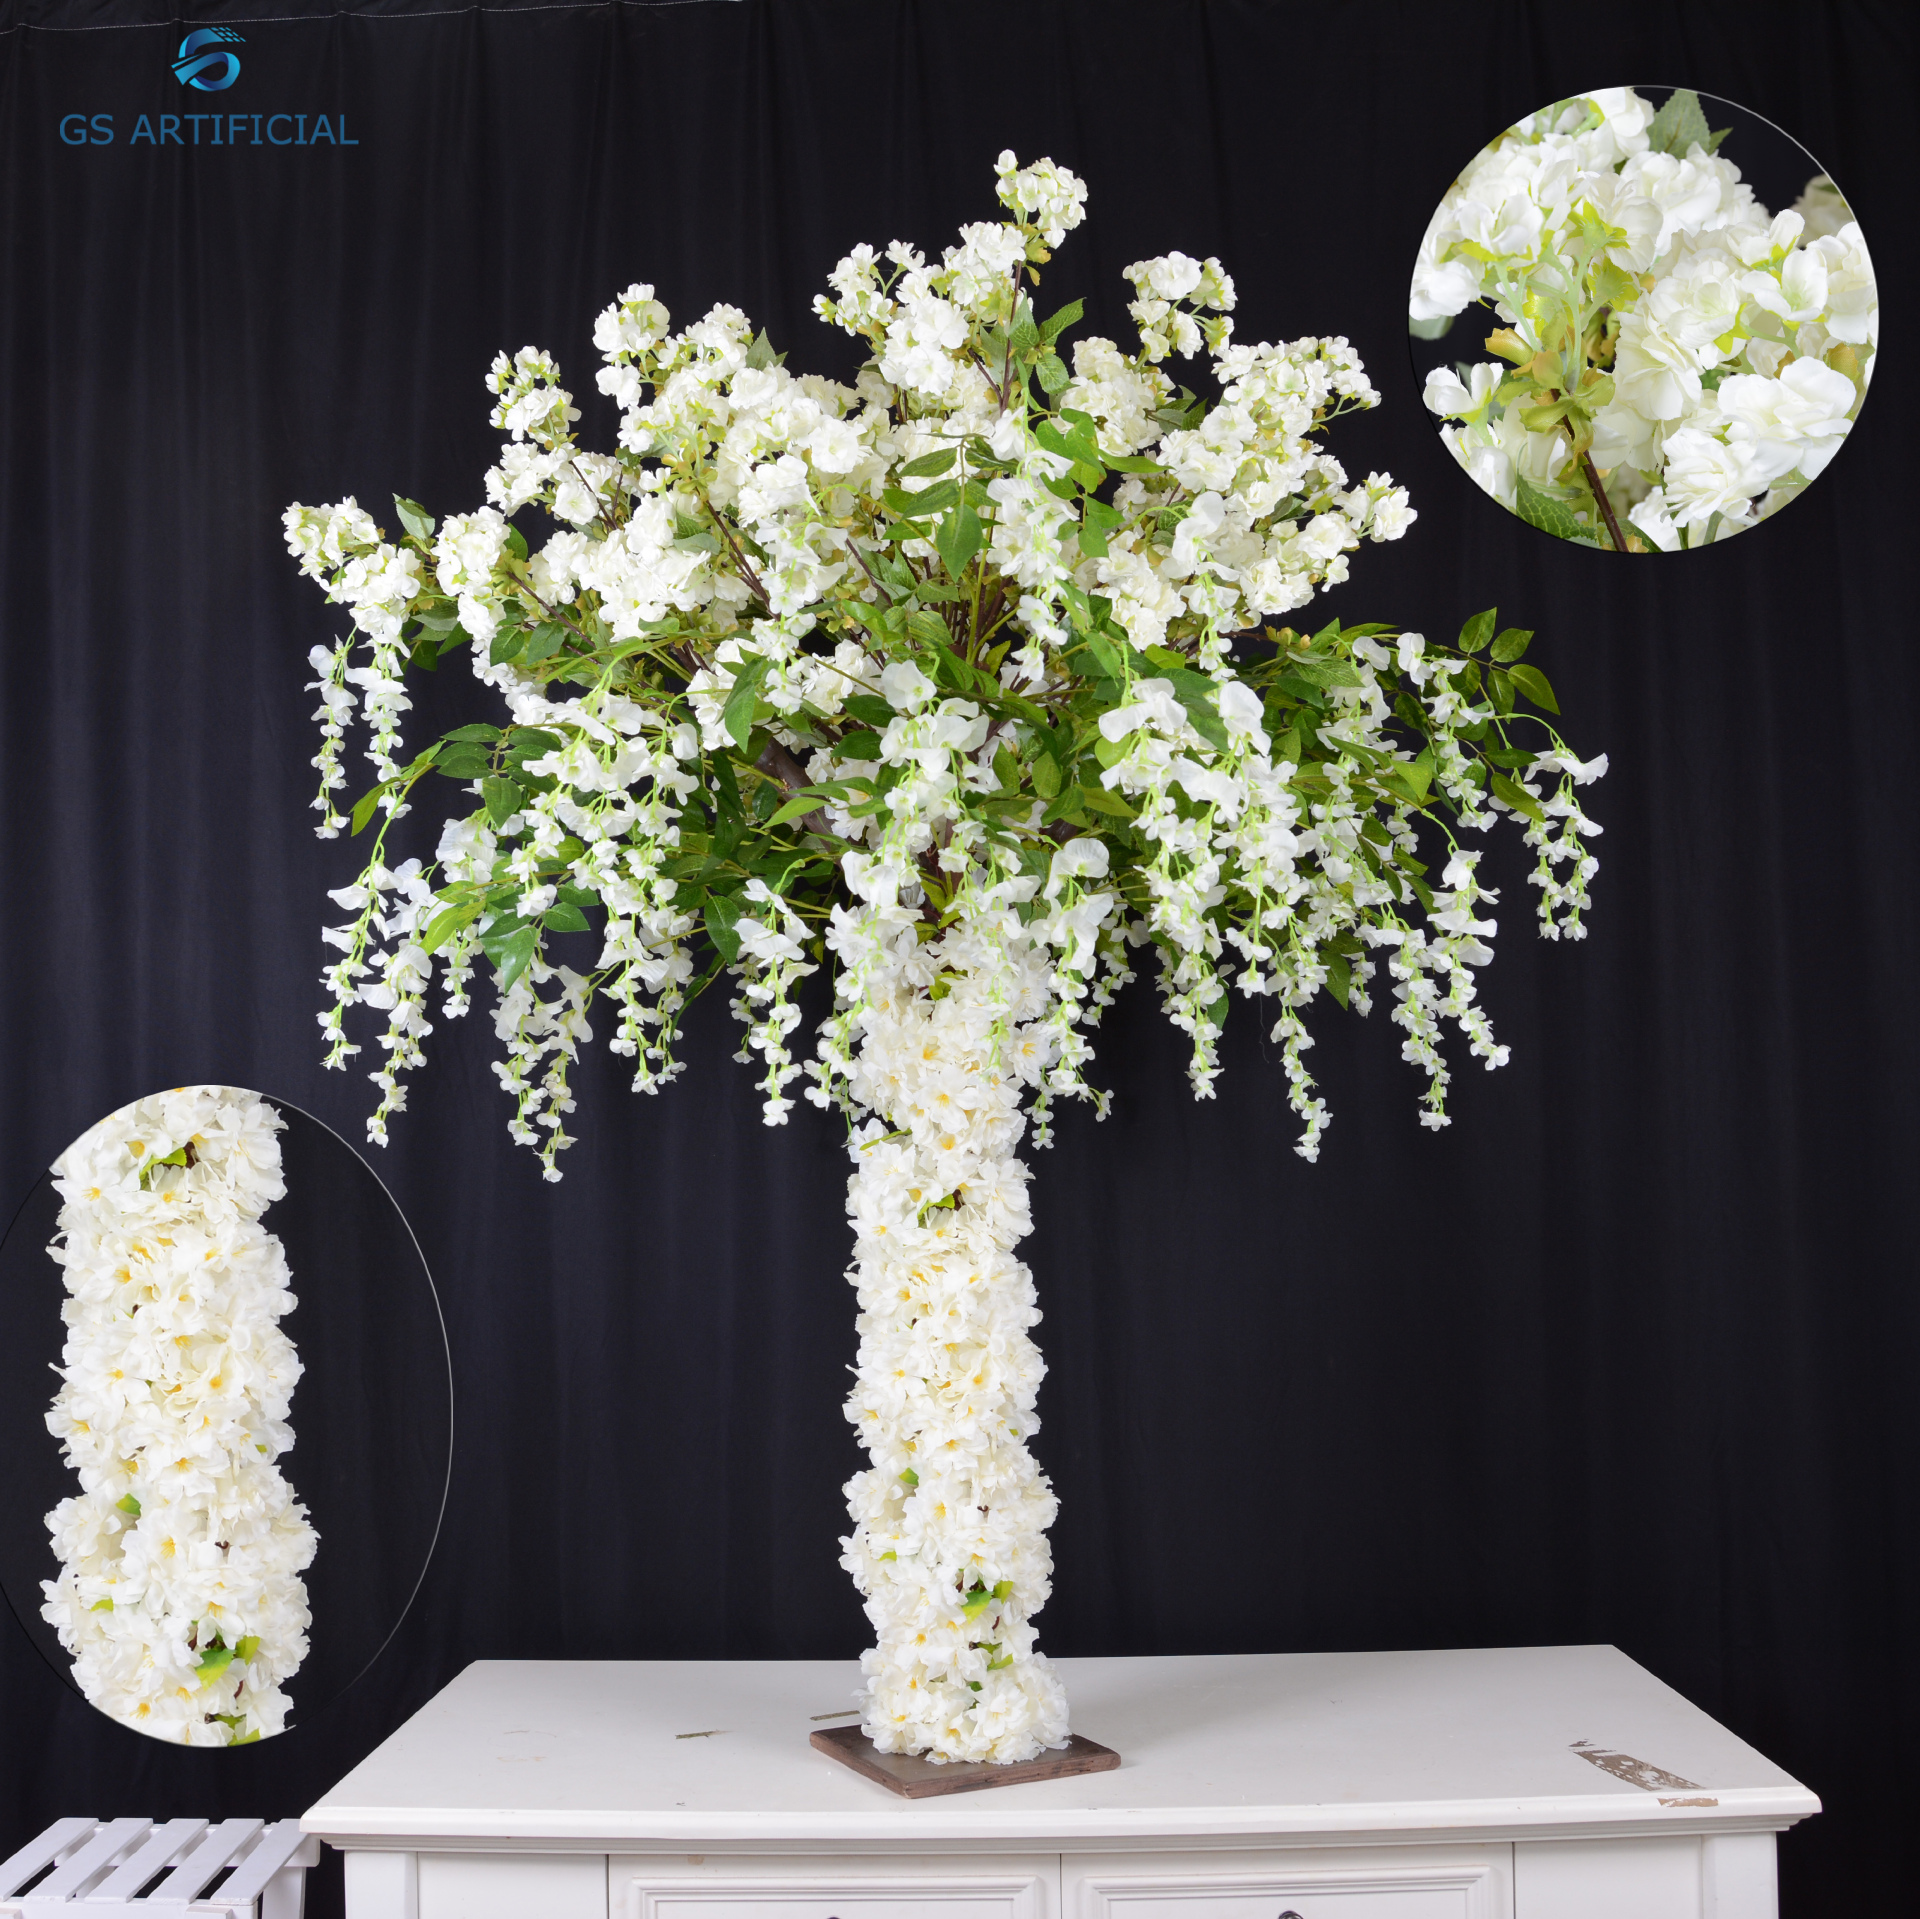 4ft tall wooden Trunk Artificial Cherry Blossom Tree mixed wisteria flowers for table centerpiece